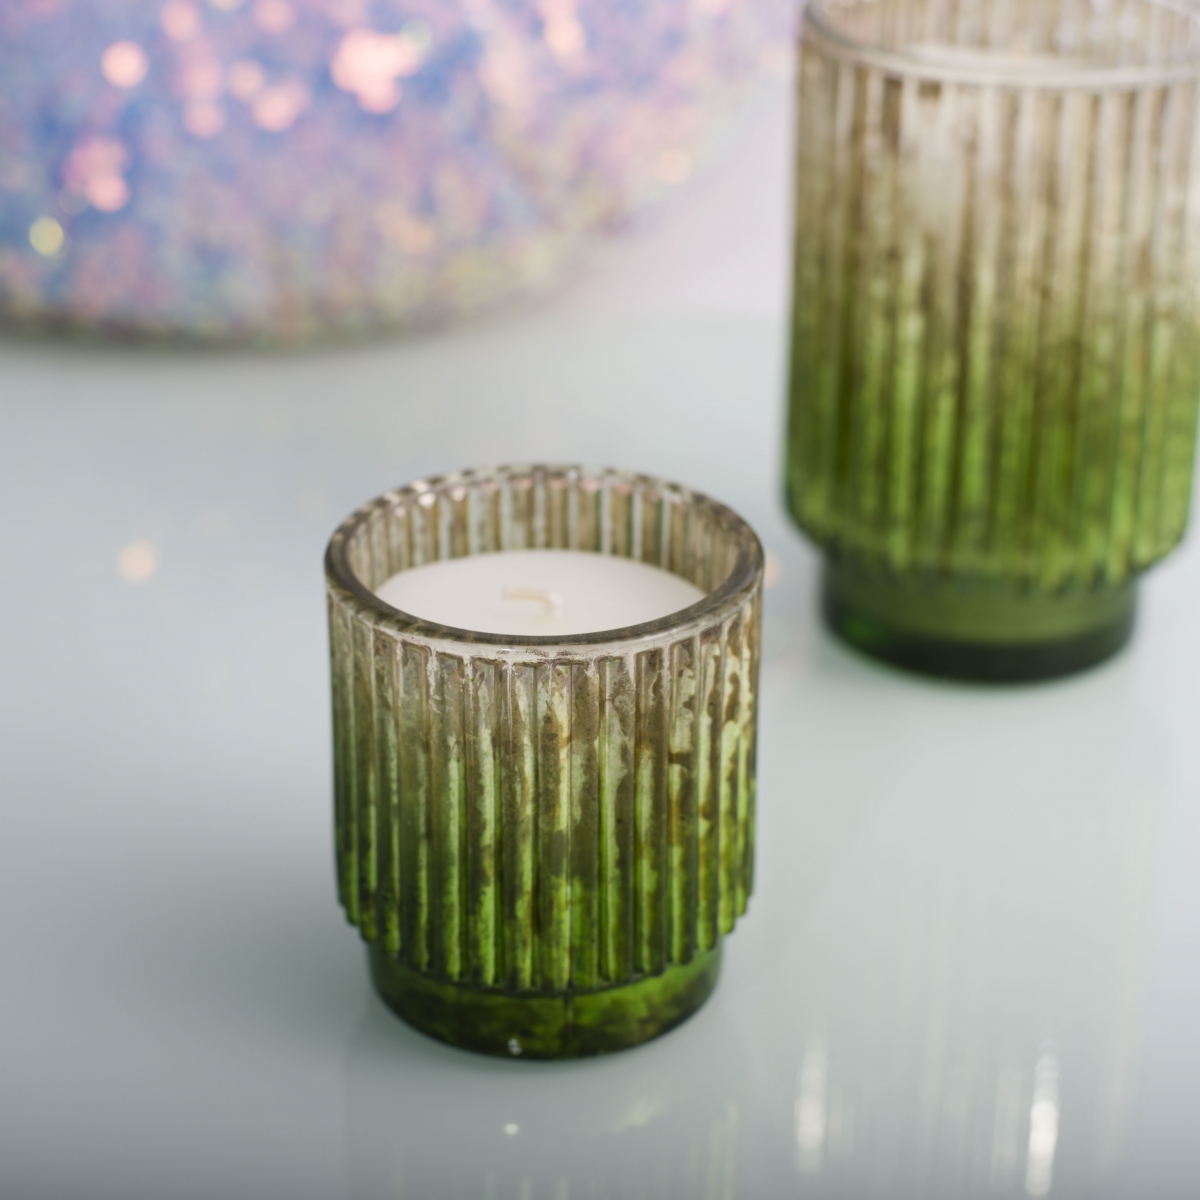 Scented Candles In Jar : Luxury Candle ,Vertical Stripes Glass Jar,Greenhouse ,Relax ,China Factory ,Cheapest Price-HOWCANDLE-Candles,Scented Candles,Aromatherapy Candles,Soy Candles,Vegan Candles,Jar Candles,Pillar Candles,Candle Gift Sets,Essential Oils,Reed Diffuser,Candle Holder,